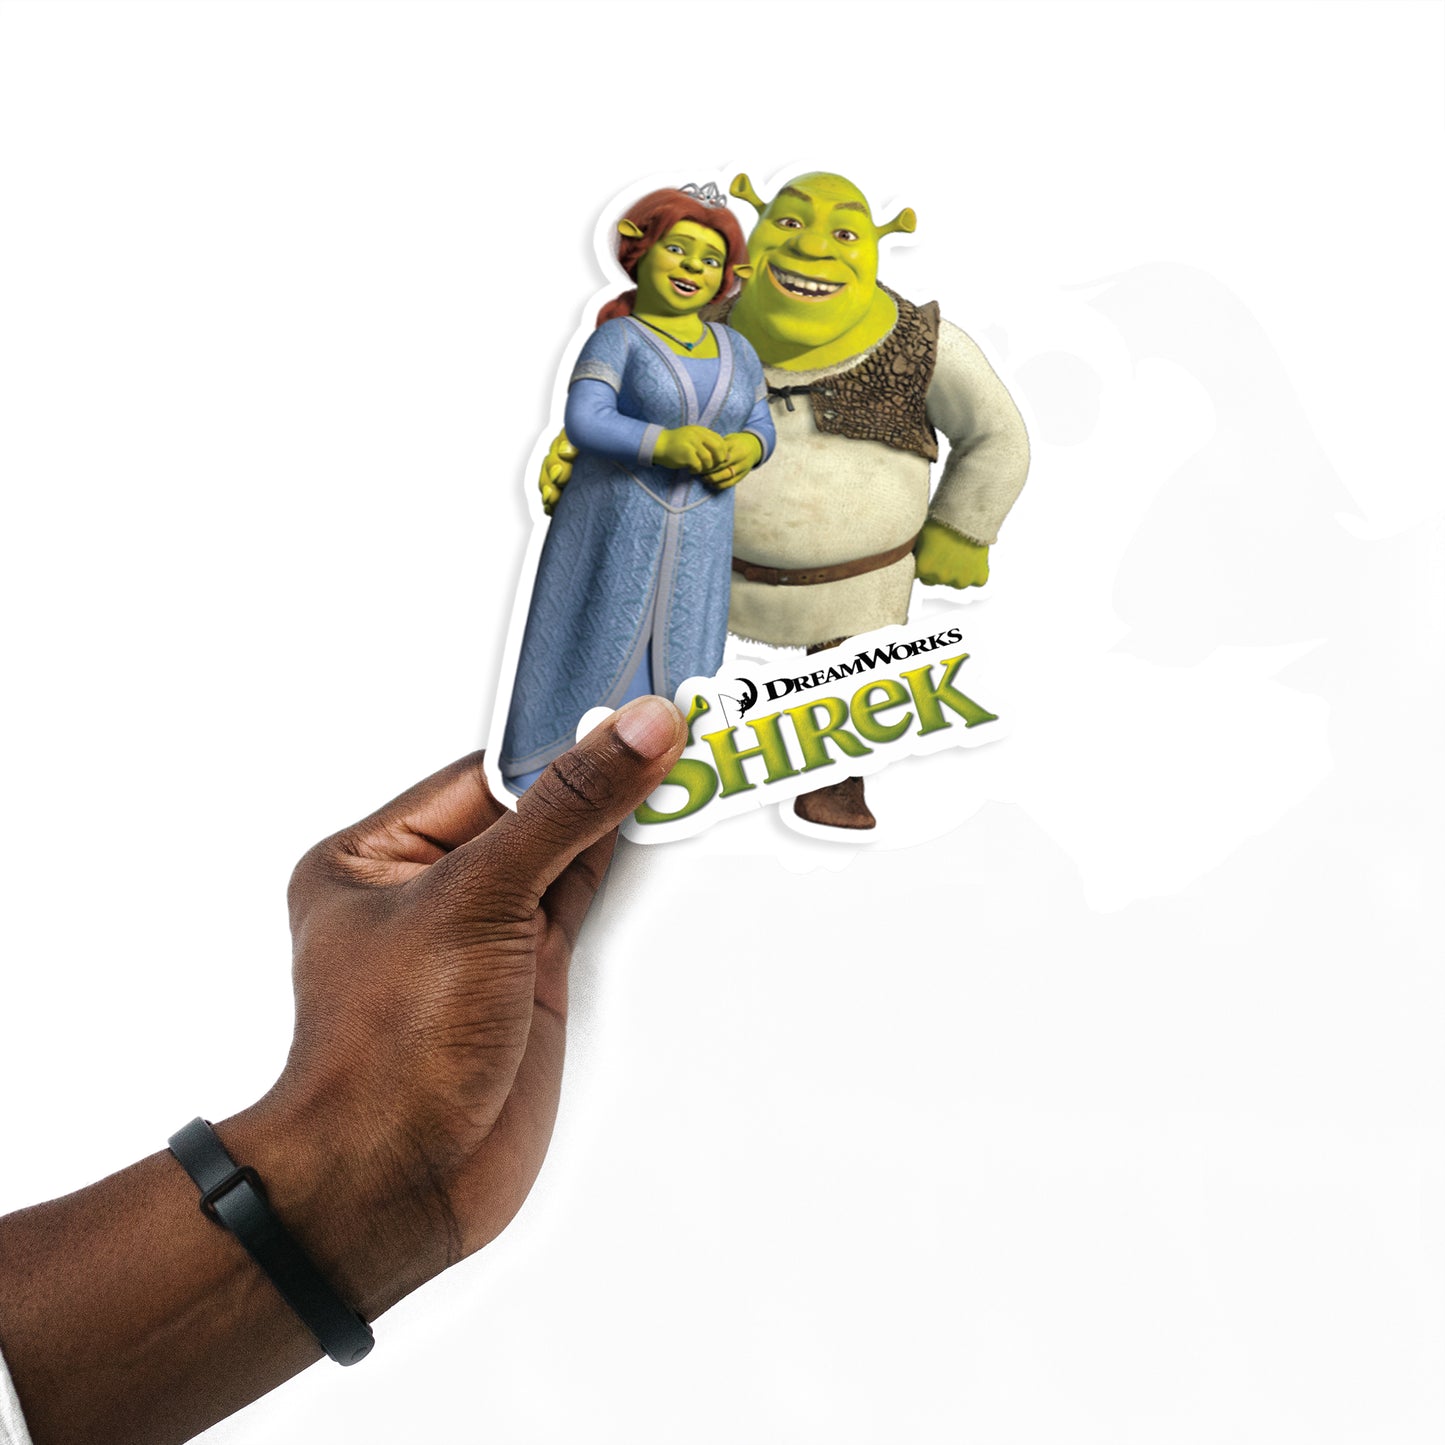 Sheet of 5 -Shrek:  Shrek & Fiona Minis        - Officially Licensed NBC Universal Removable    Adhesive Decal